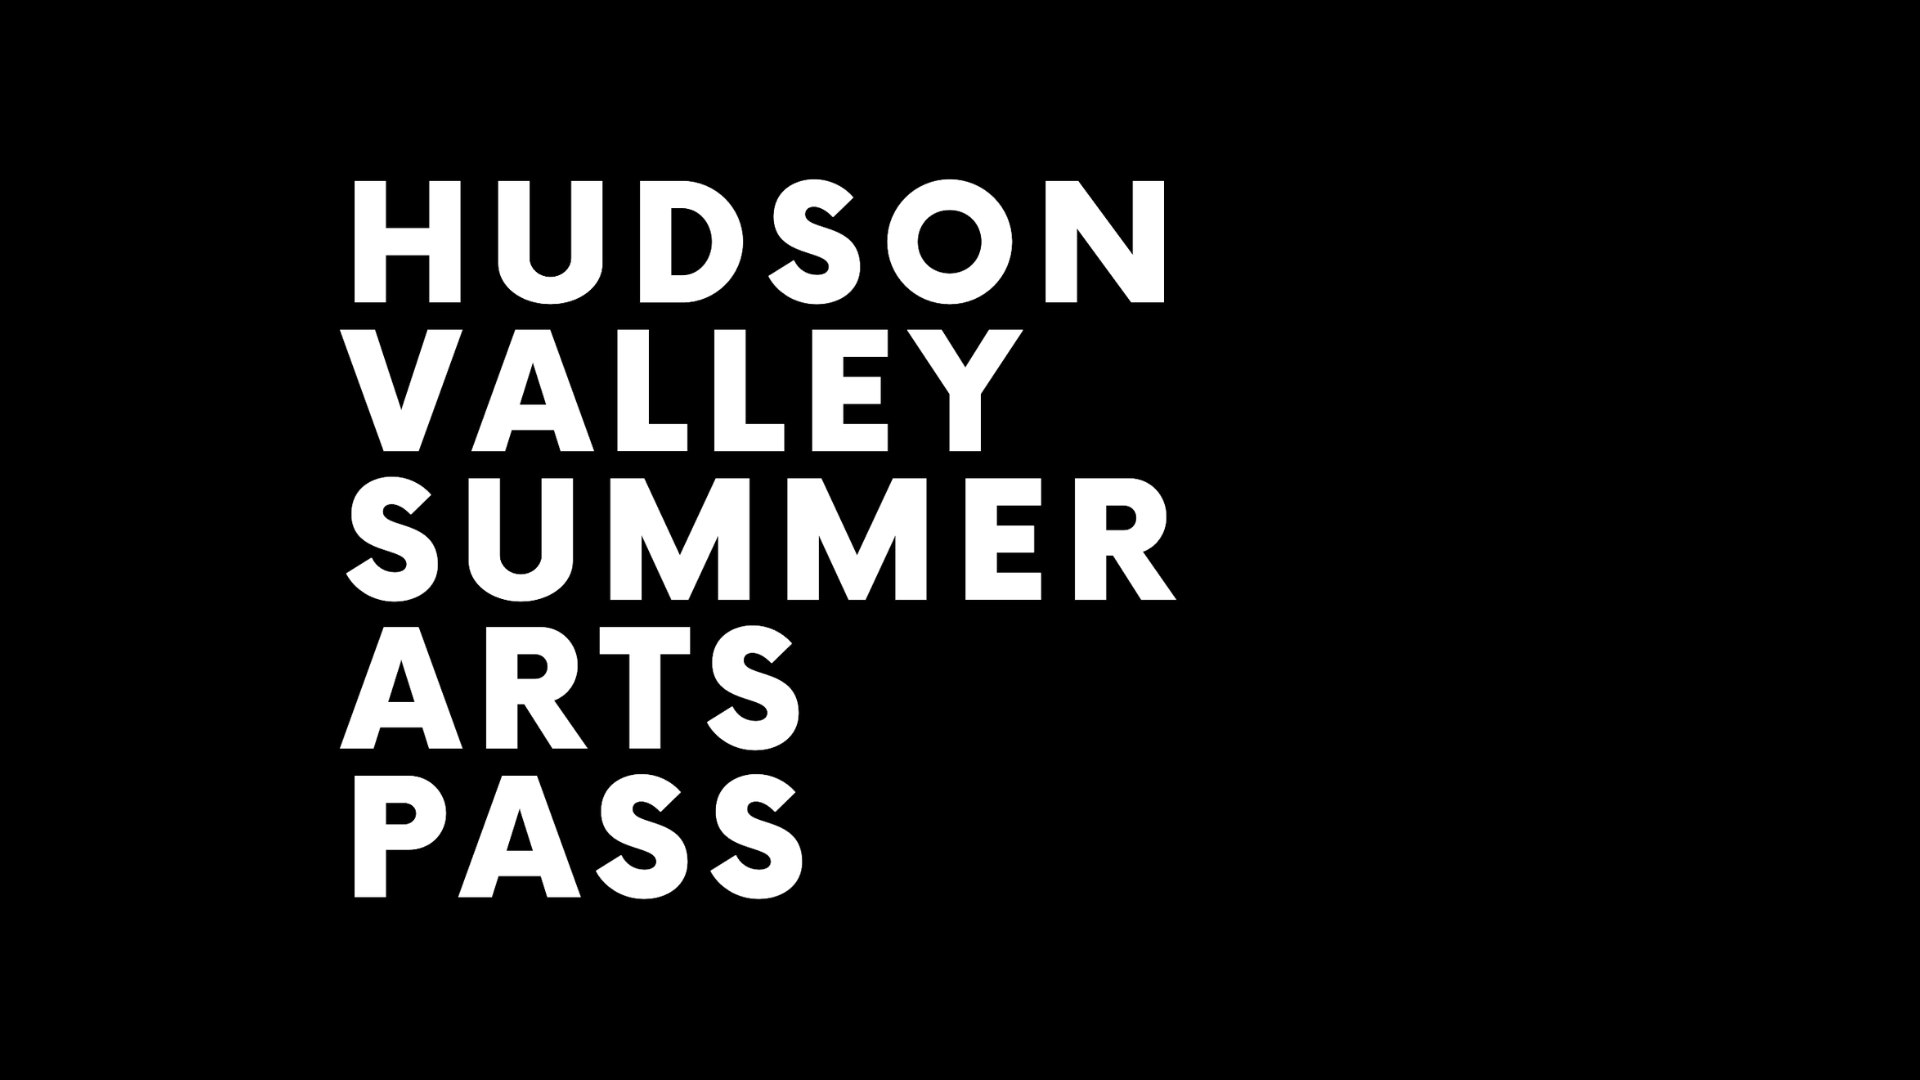 Experience the Arts this Summer with the Hudson Valley Summer Arts Pass